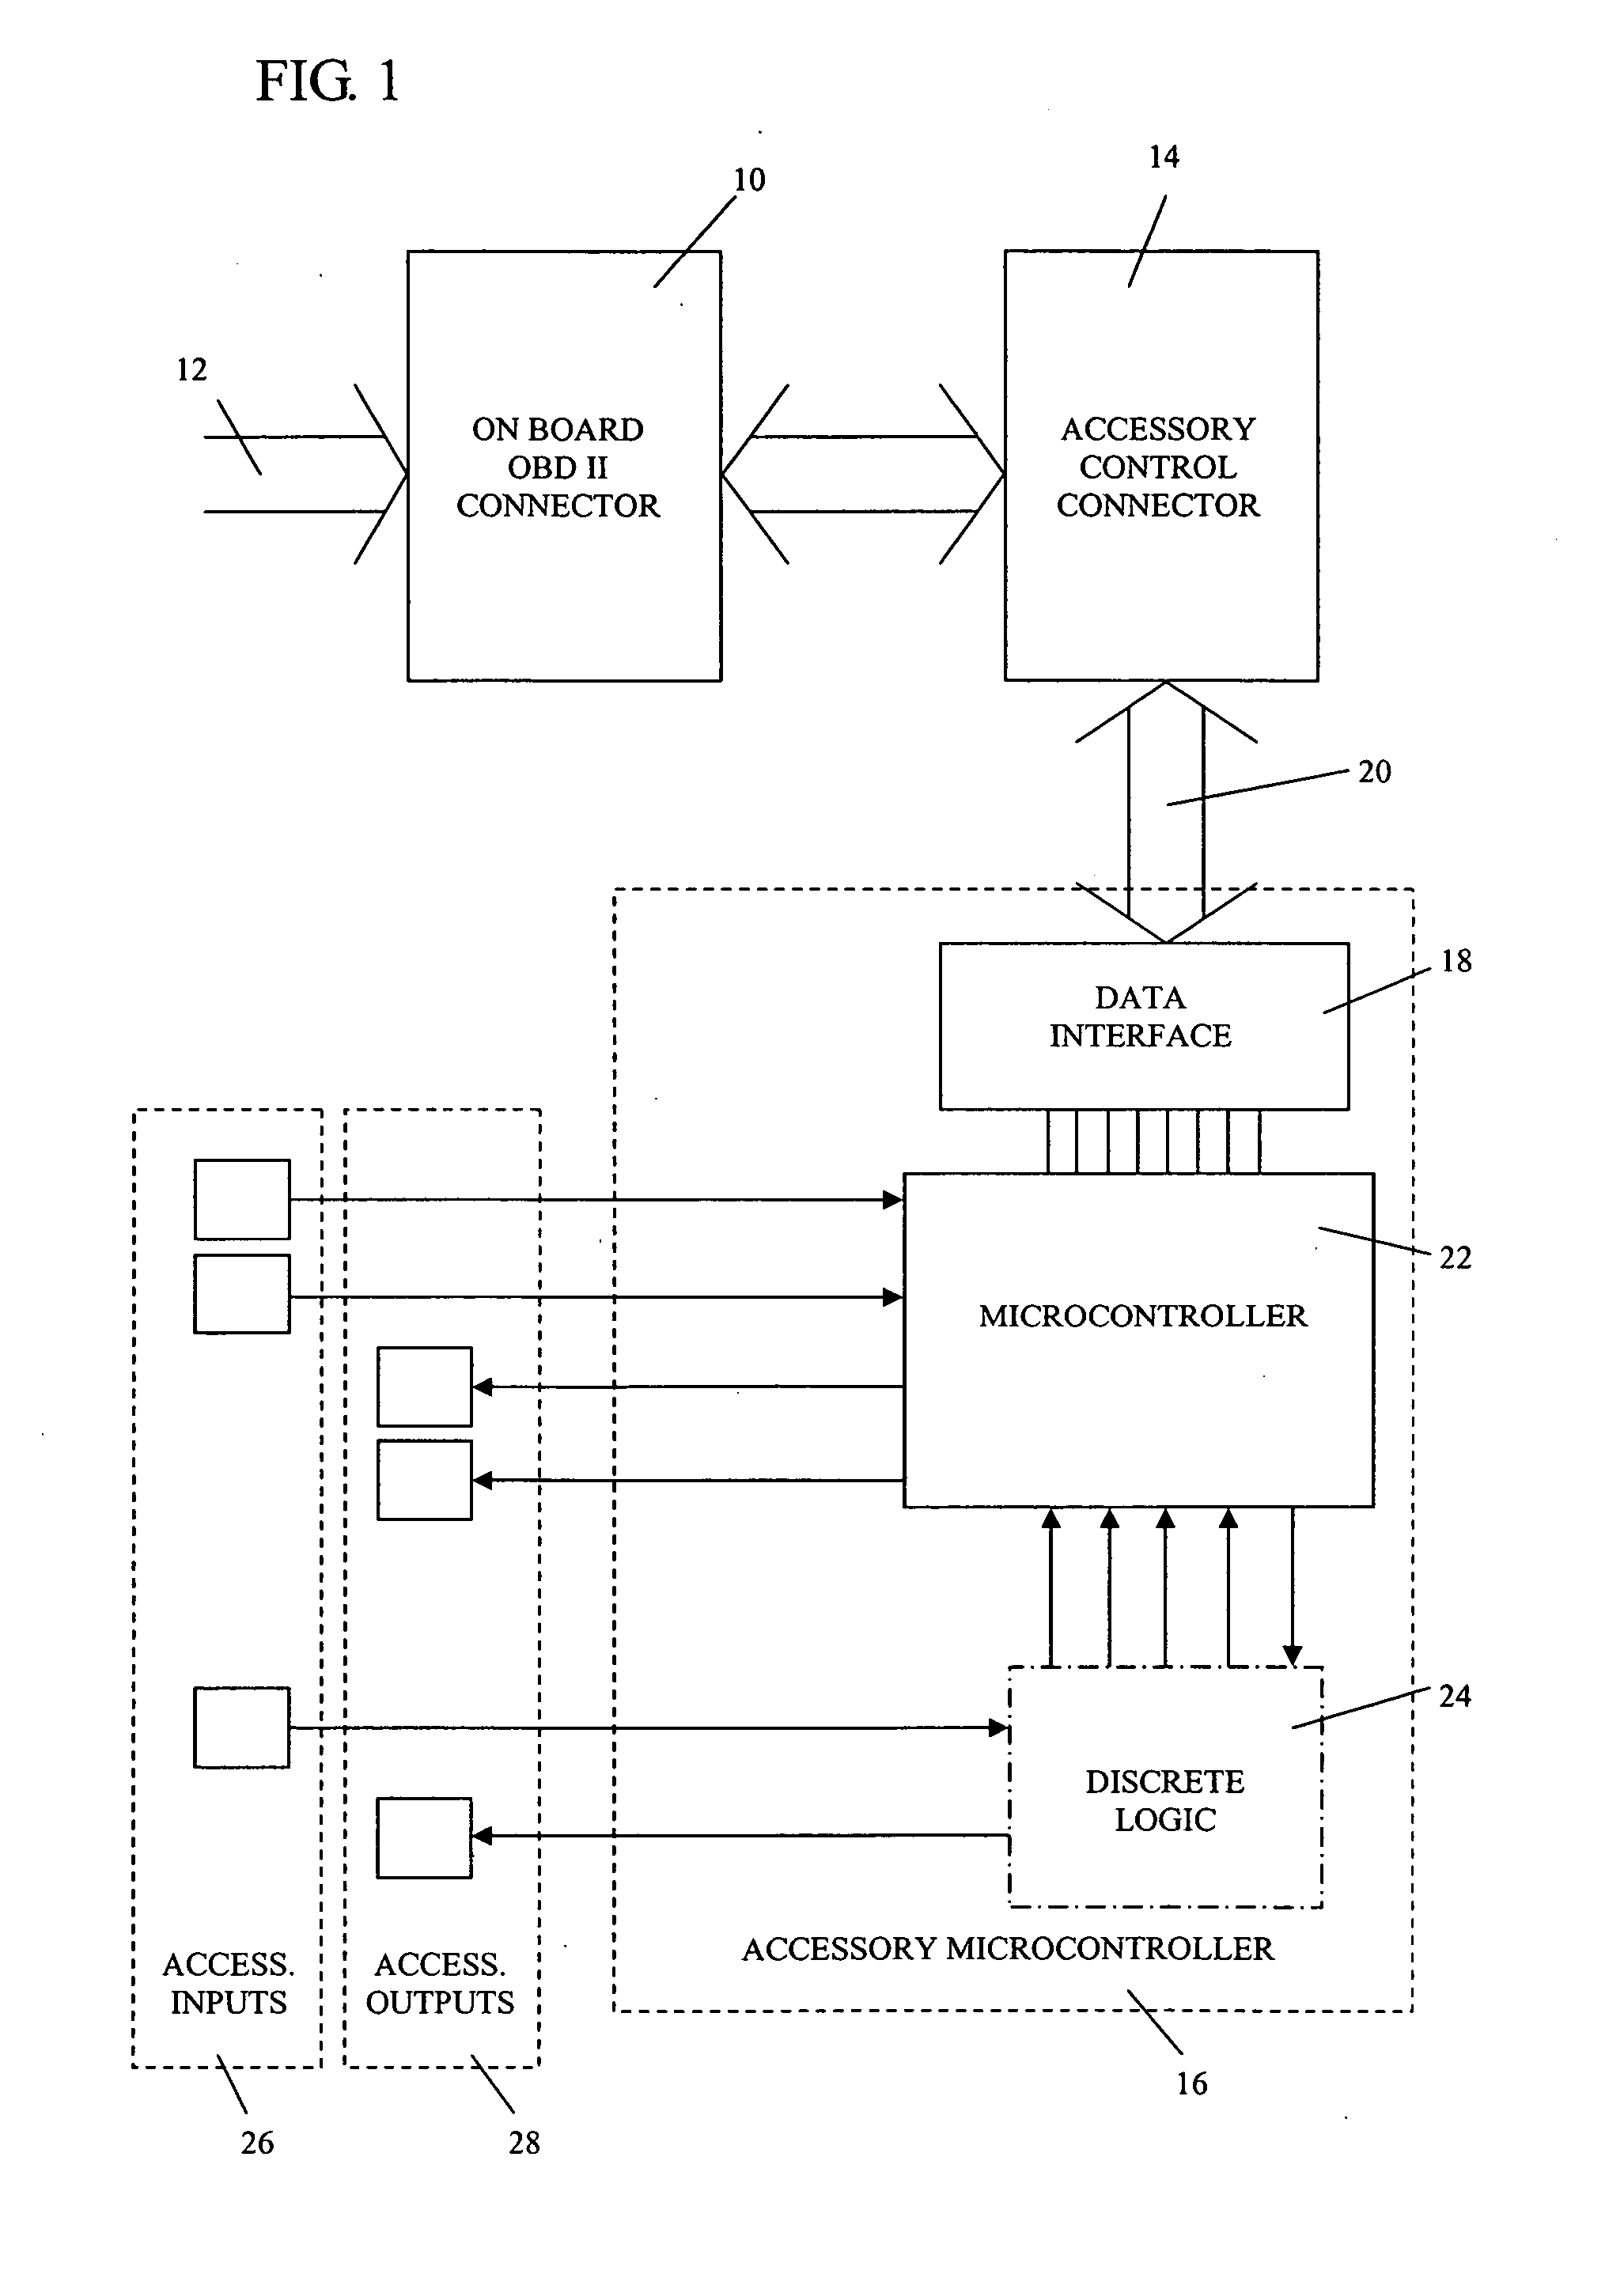 Interdependent control of aftermarket vehicle accessories without invasive control connections